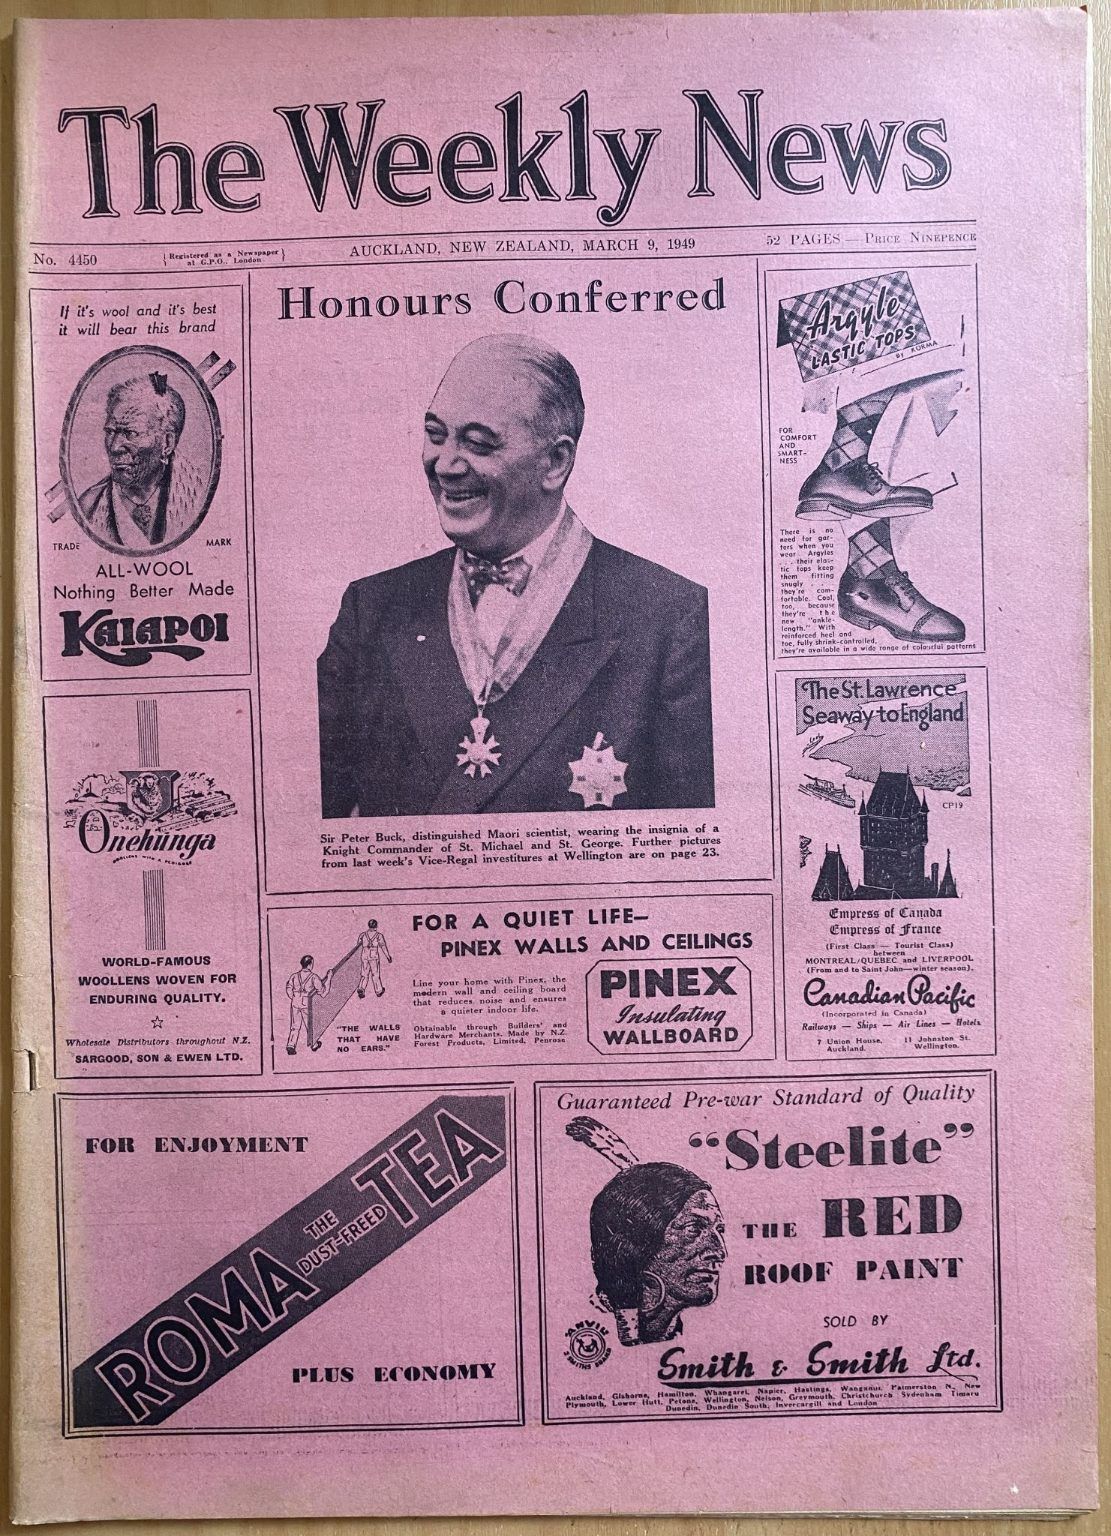 OLD NEWSPAPER: The Weekly News, No. 4450, 9 March 1949